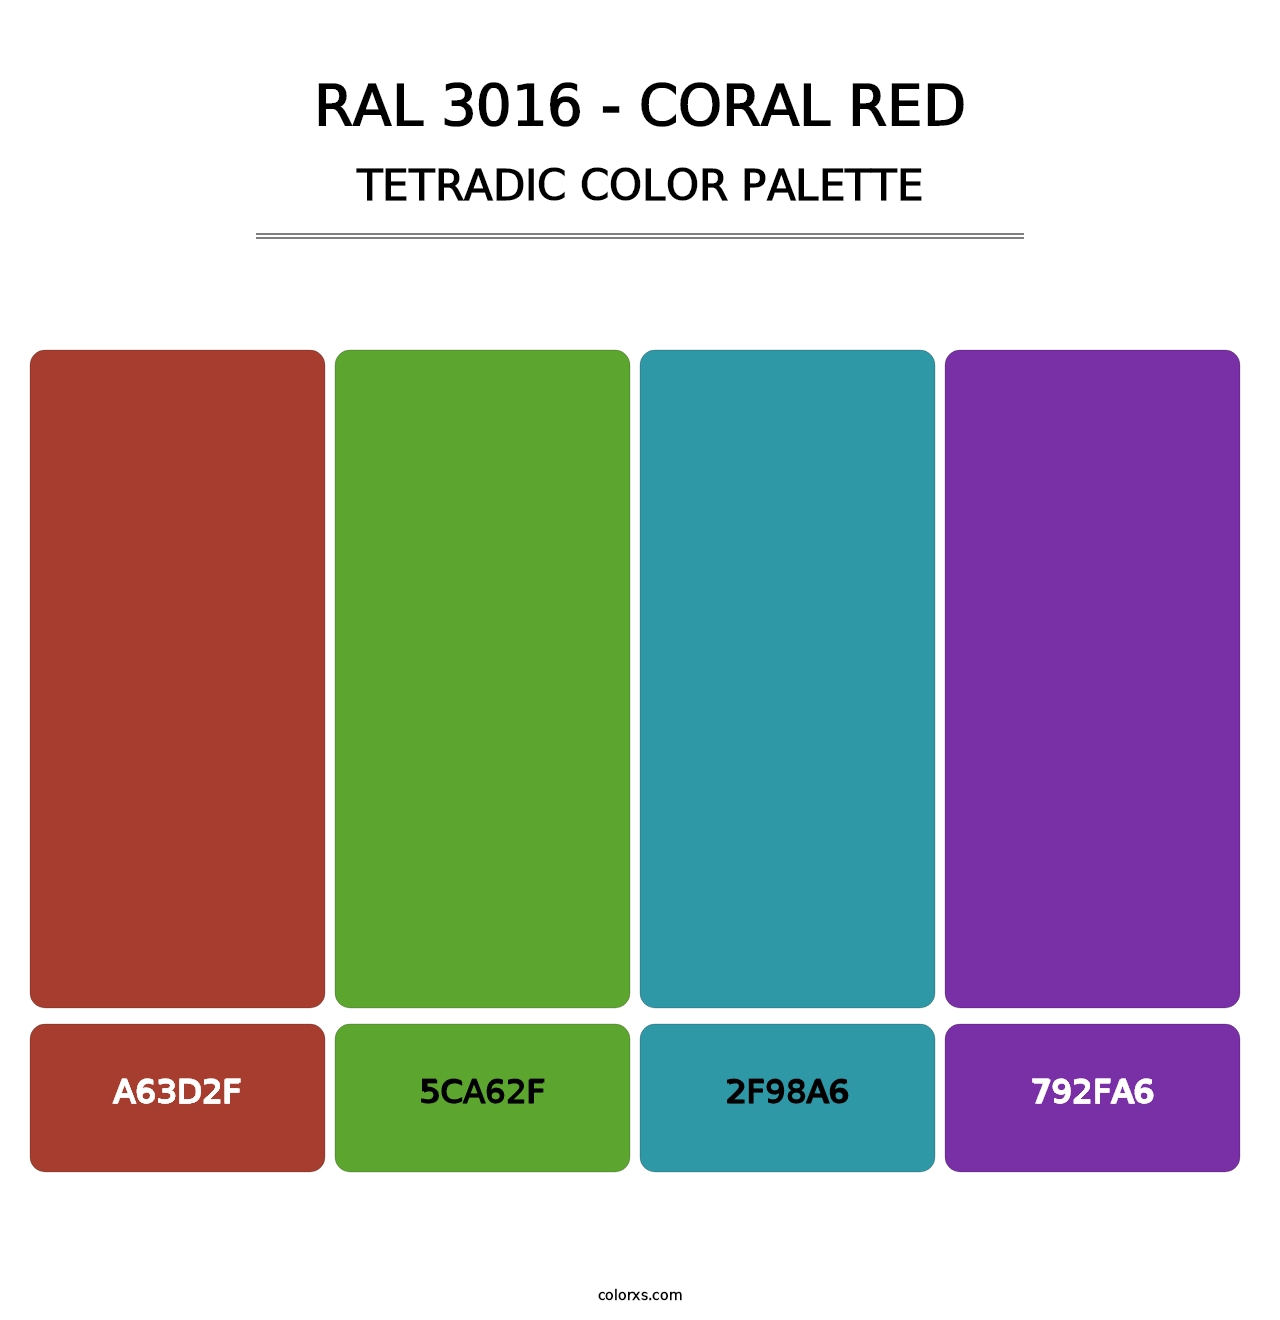 RAL 3016 - Coral Red - Tetradic Color Palette